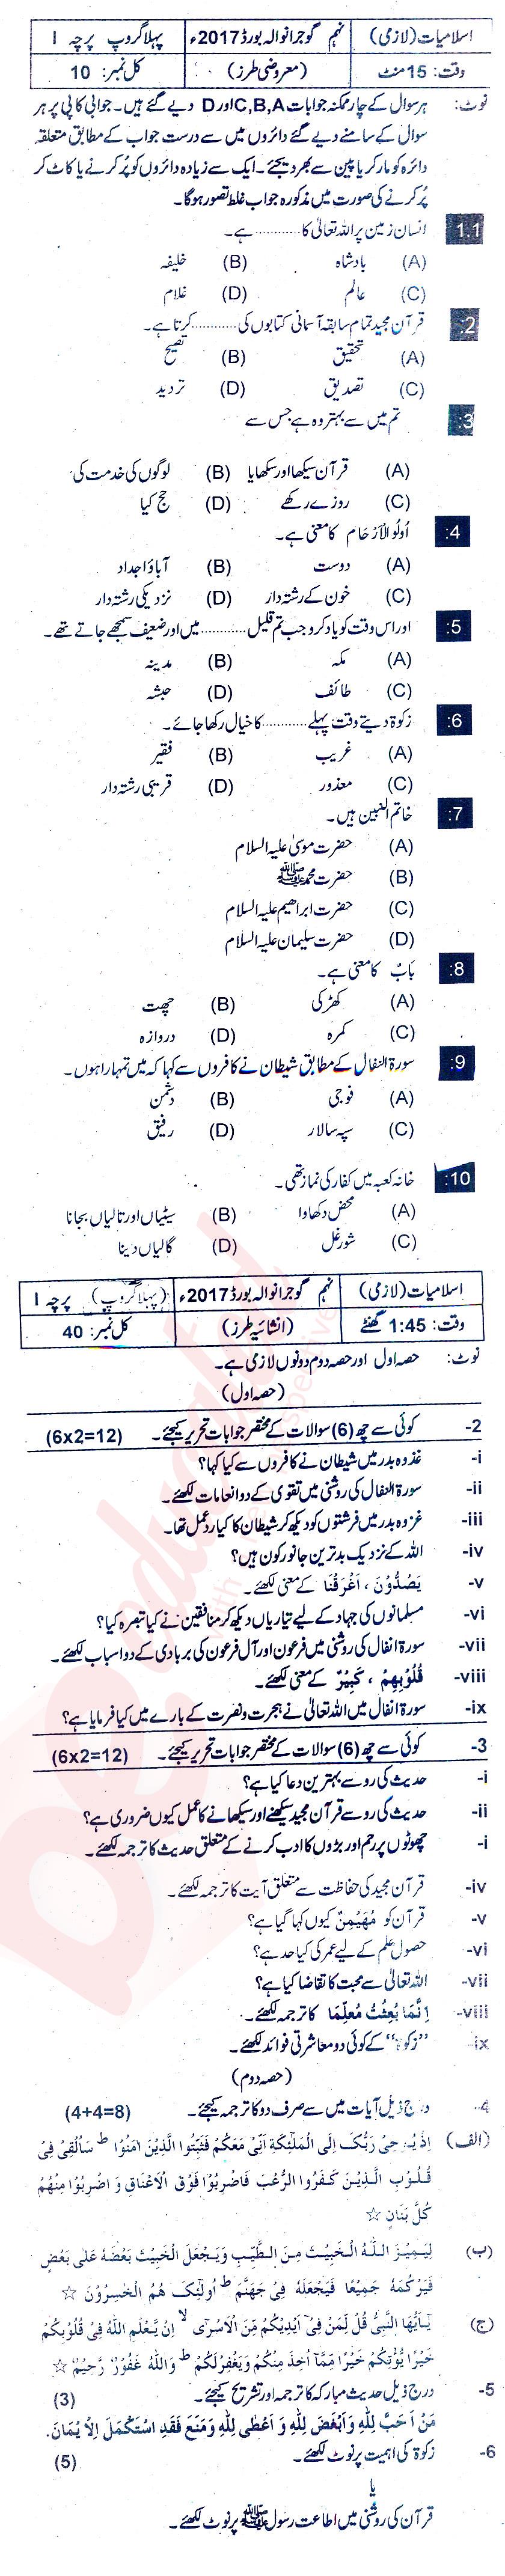 Islamiat (Compulsory) 9th class Past Paper Group 1 BISE Gujranwala 2017